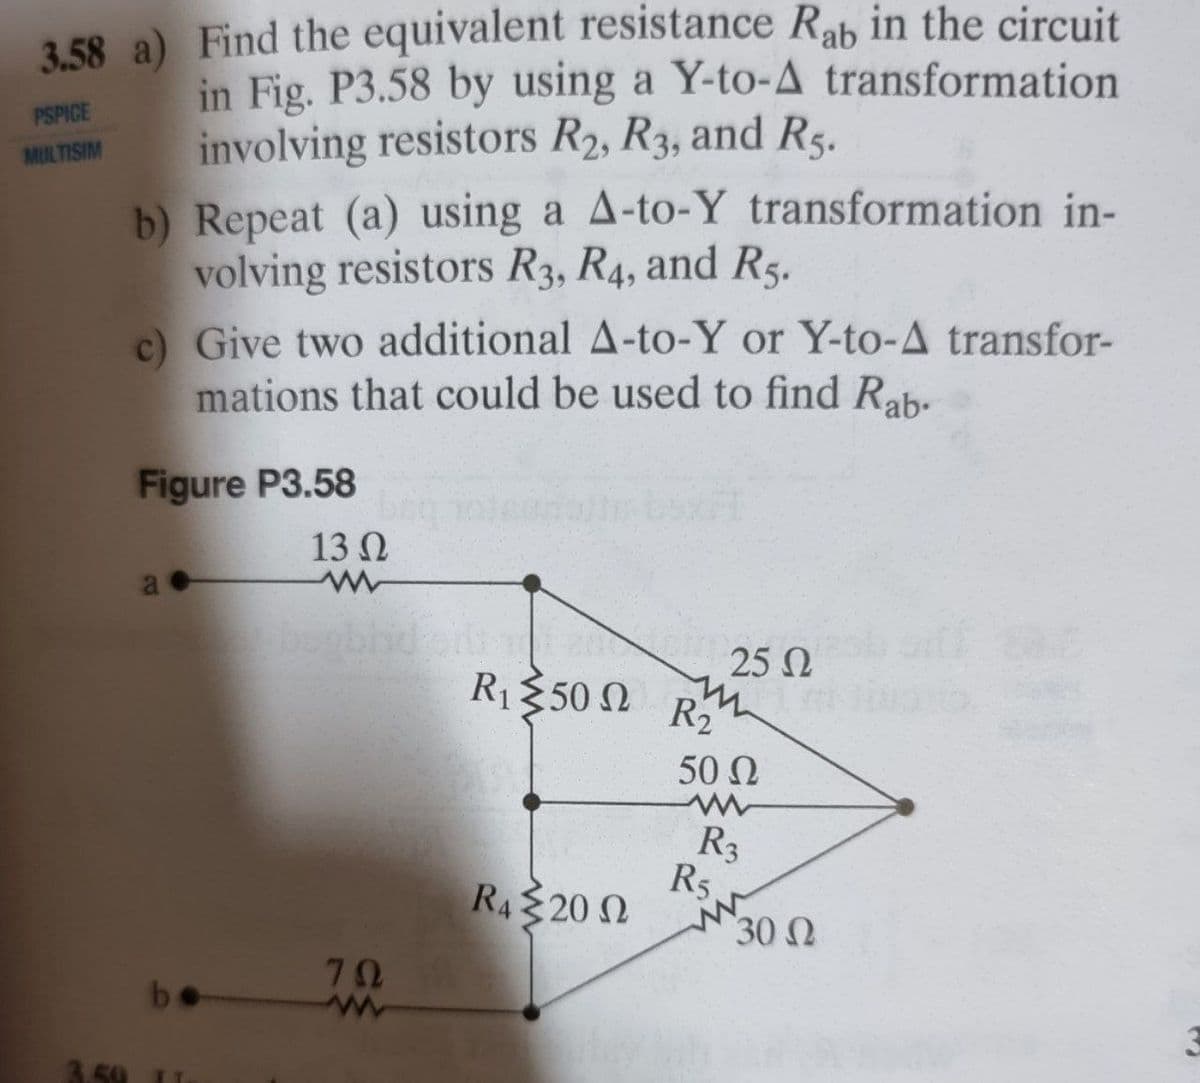 3.58 a) Find the equivalent resistance Rab in the circuit
in Fig. P3.58 by using a Y-to-A transformation
involving resistors R2, R3, and R5.
PSPICE
MULTISIM
b) Repeat (a) using a A-to-Y transformation in-
volving resistors R3, R4, and R5.
c) Give two additional A-to-Y or Y-to-A transfor-
mations that could be used to find Rab-
Figure P3.58
13 N
25 N
R1350 N R2
50 N
R3
R5
30 N
RA 20 N
70
ww
